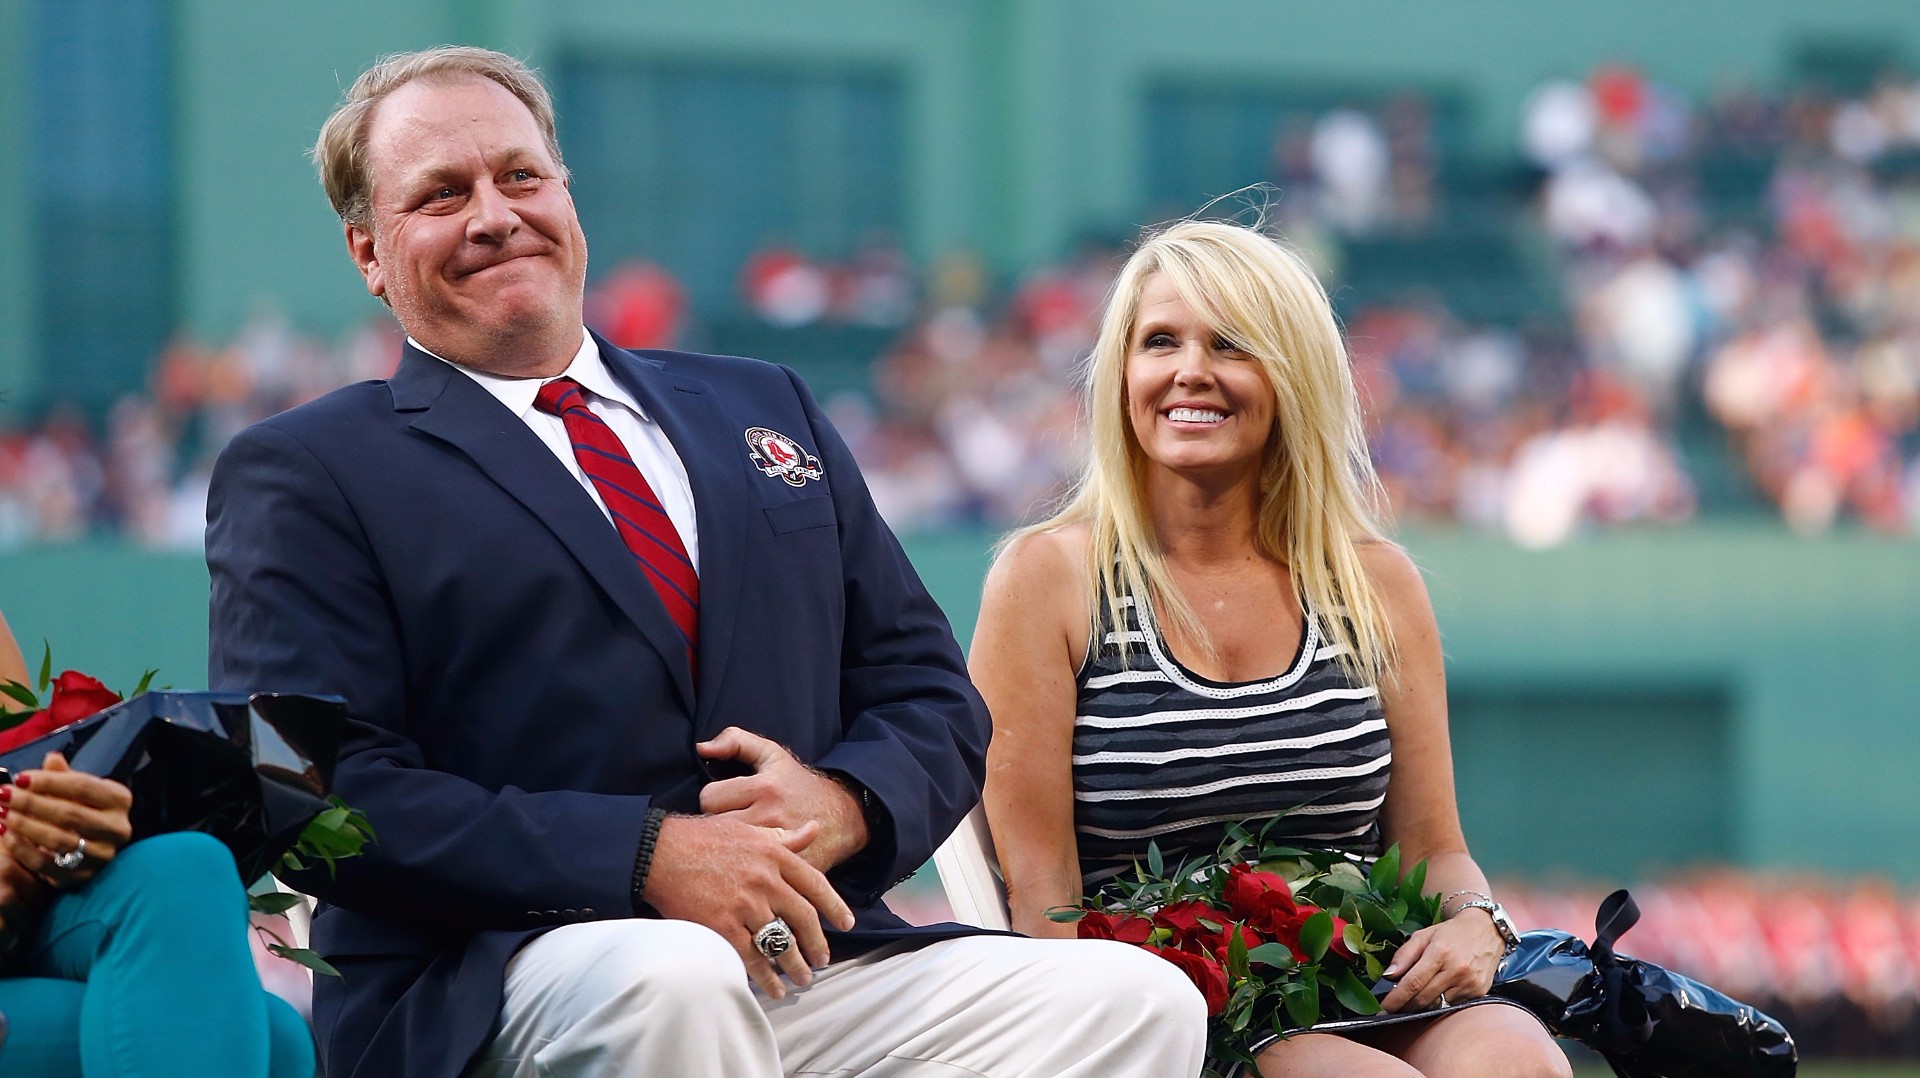 Curt Schilling defends Trump checking out 10-year-old girl, says he admires  'gorgeous' children